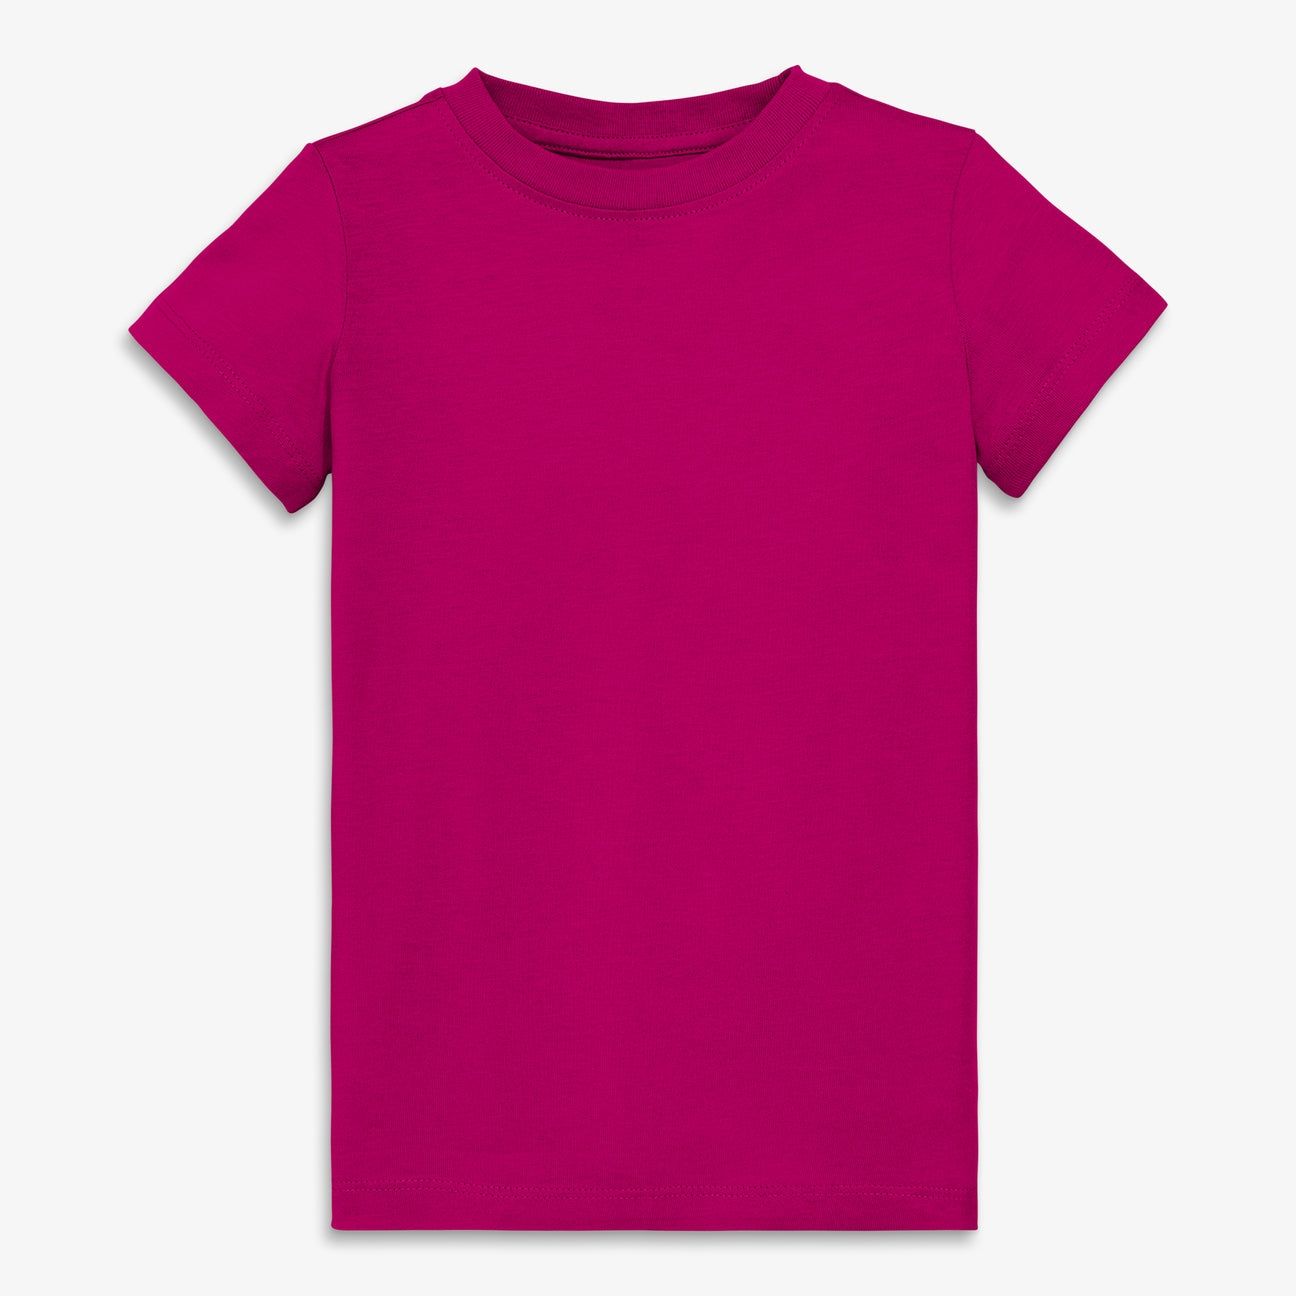 Pink Solid T-Shirt - Selling Fast at